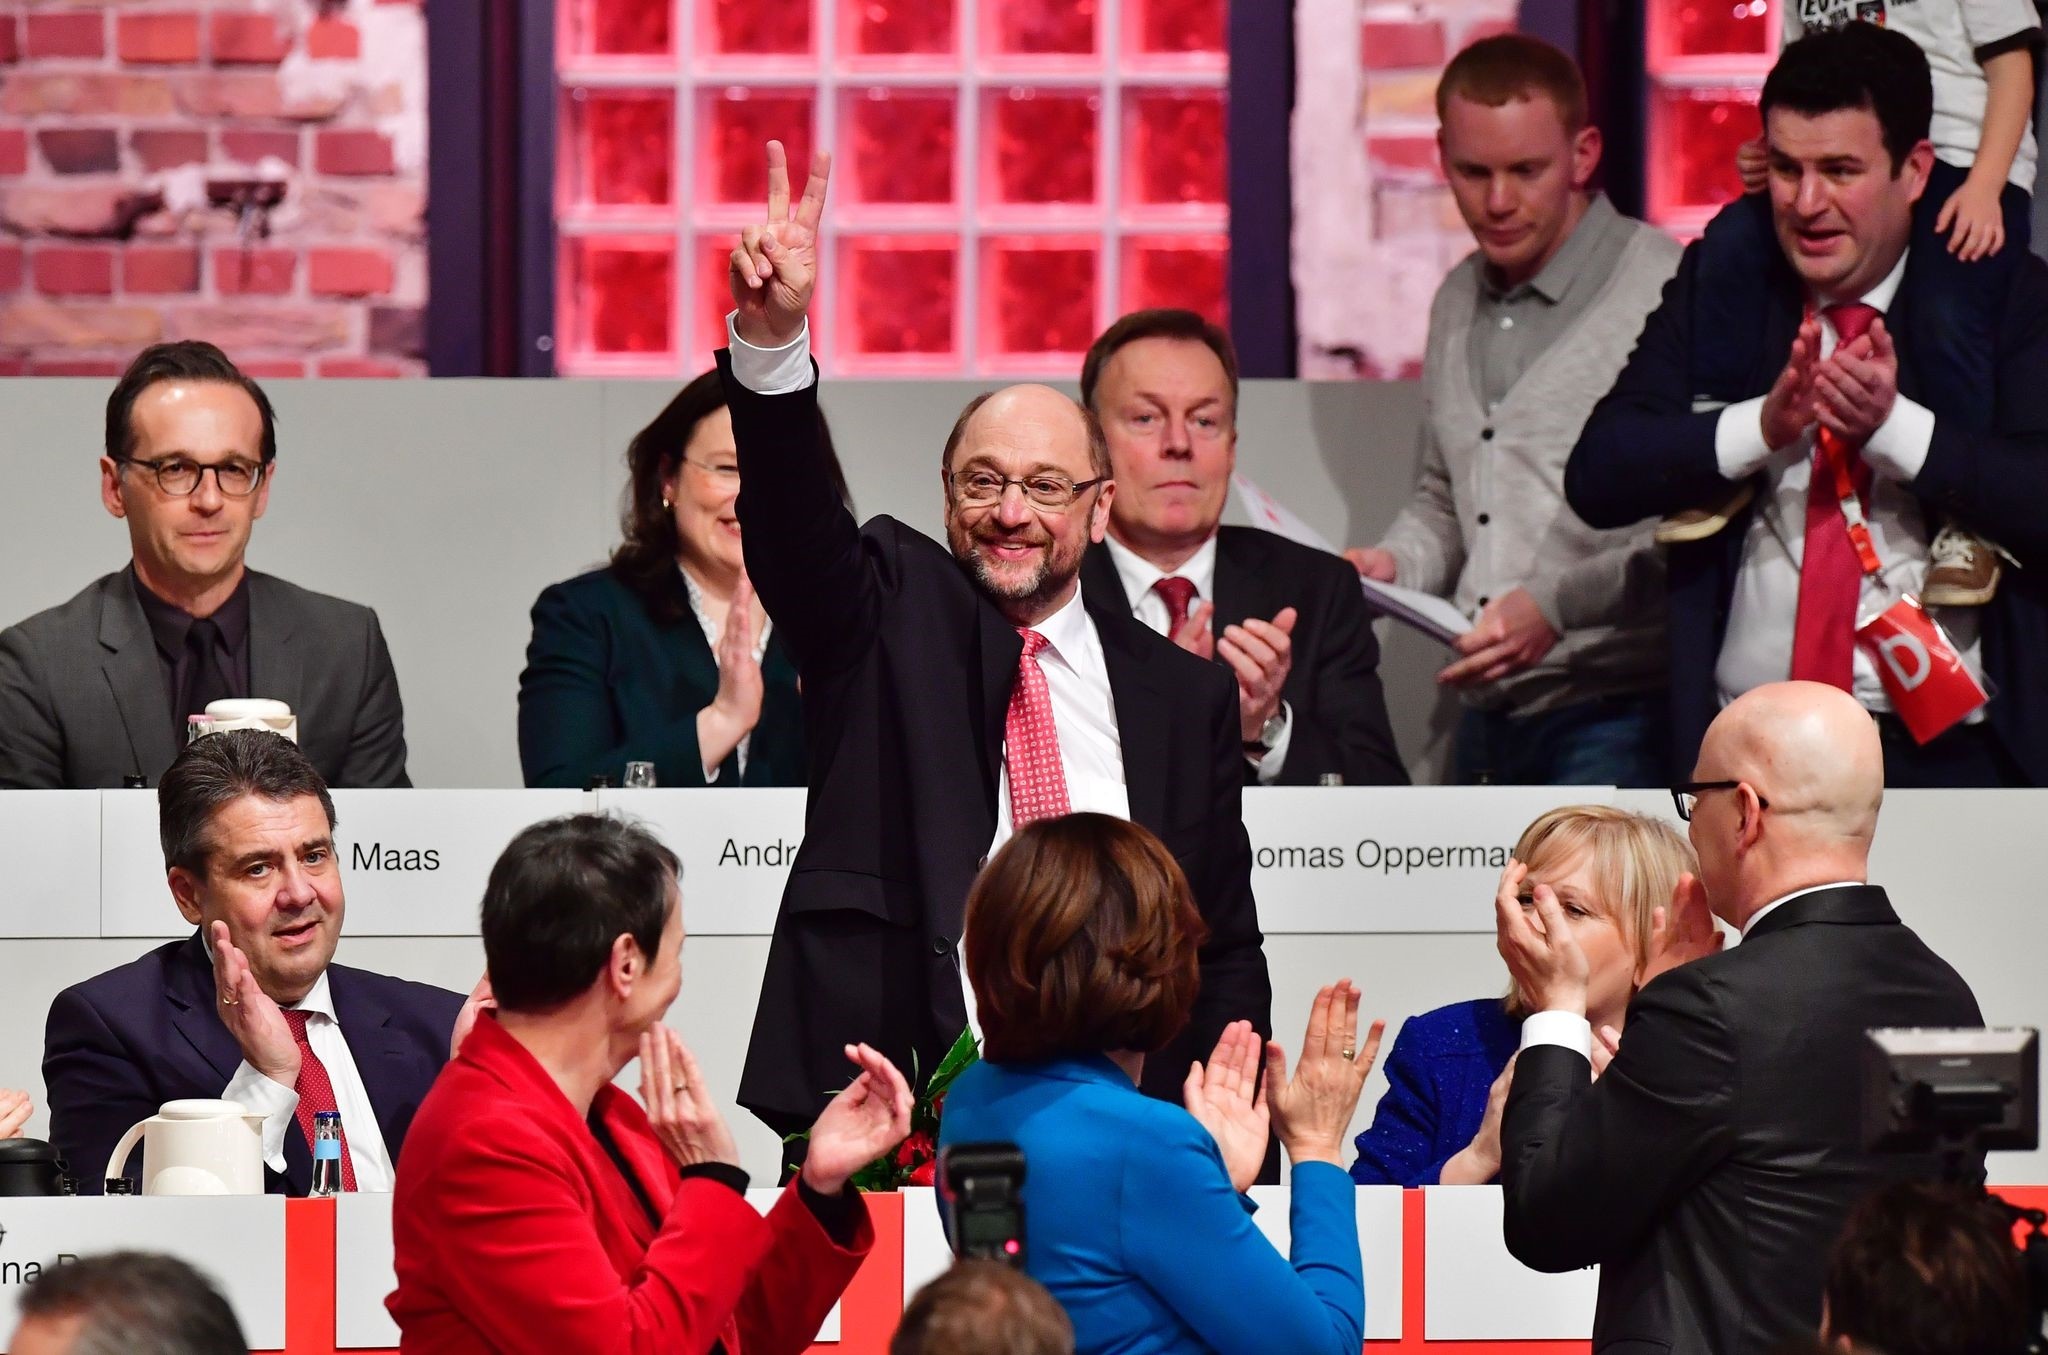 Newly elected SPD president and candidate for Chancellor of Germany's social democratic SPD party Martin Schulz flashes the V-sign after his election. (AFP Photo)